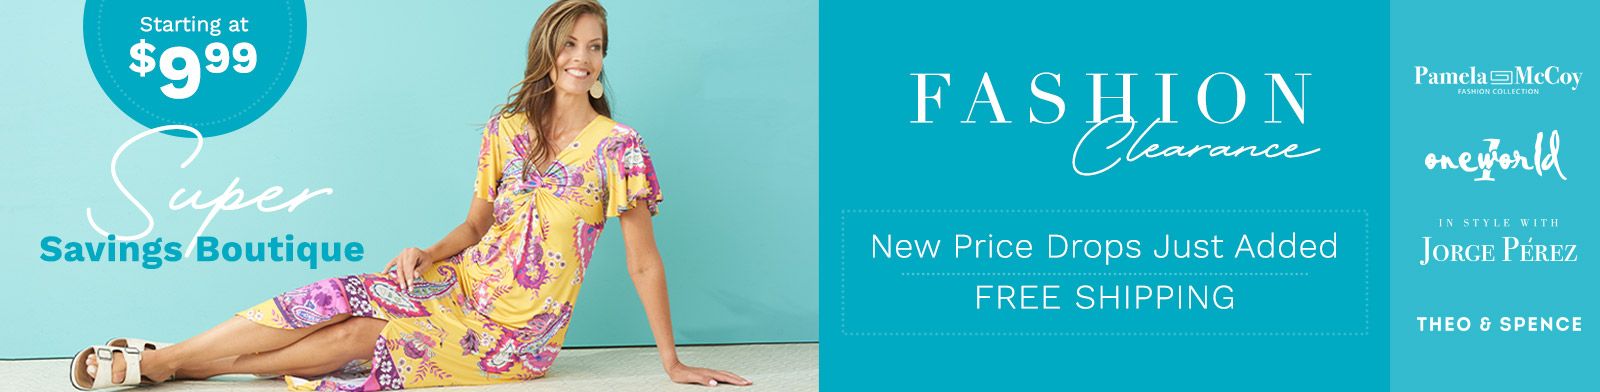 Fashion Clearance Sale | New Price Drops Just Added